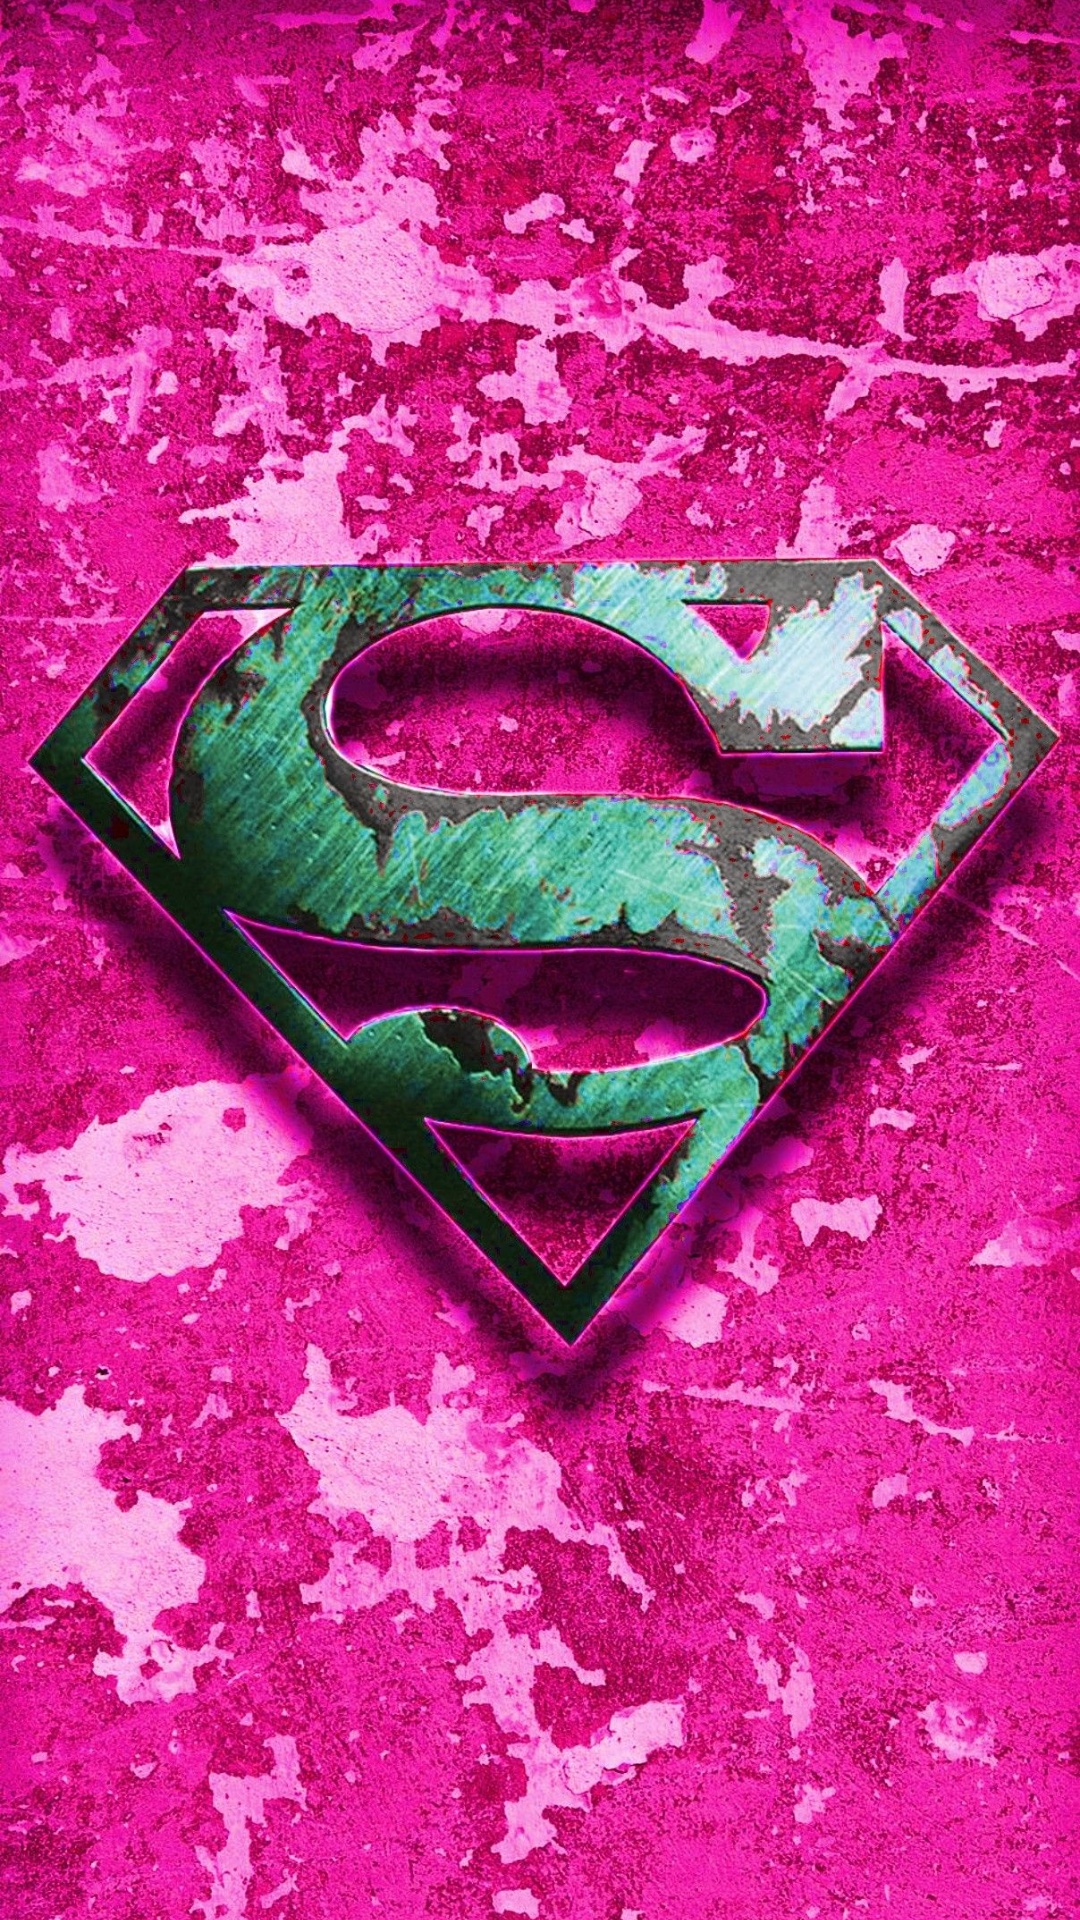 superman wallpapers for iphone